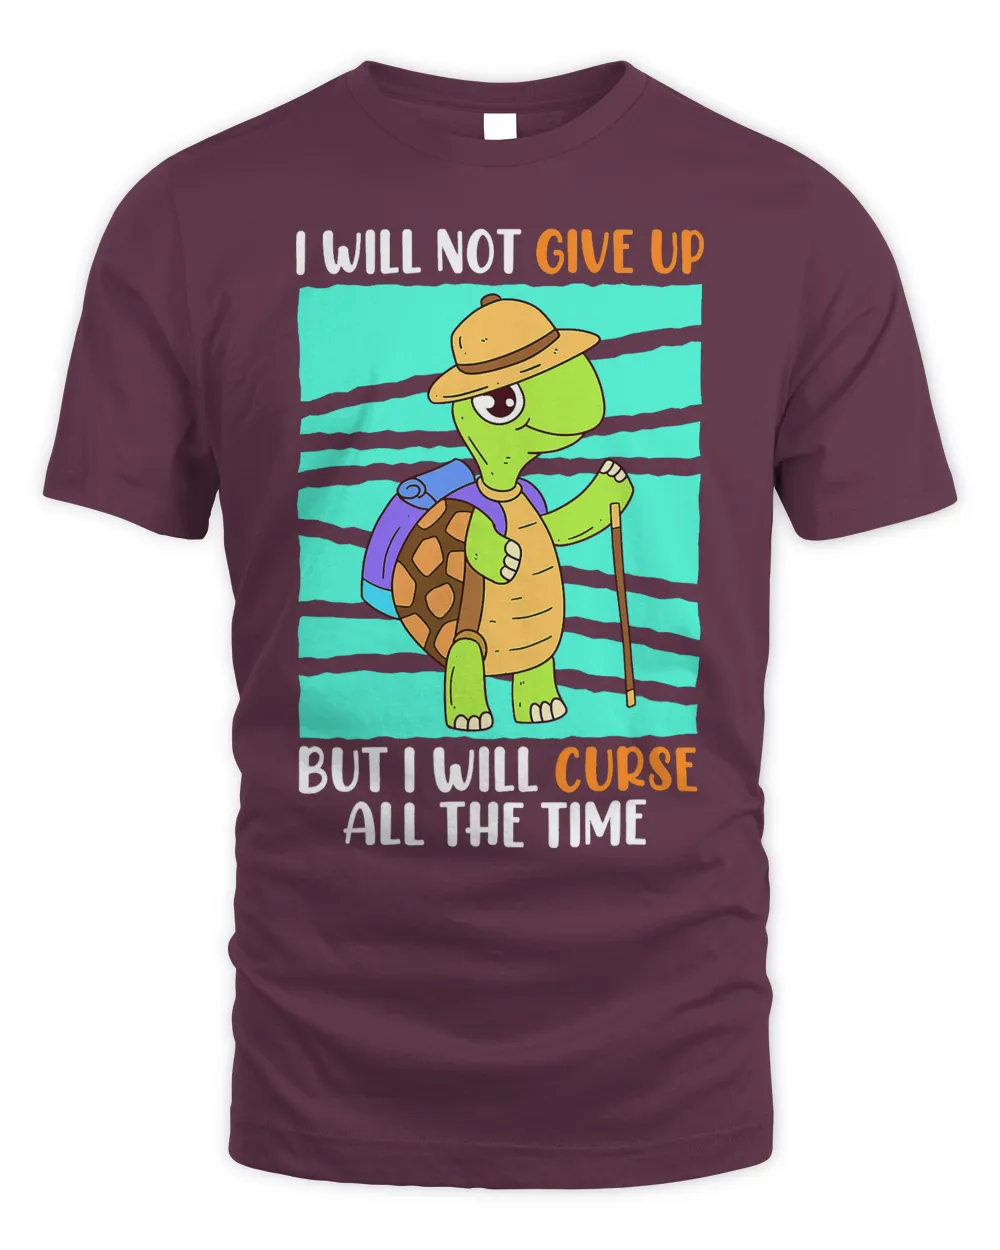 Do not give up but swear Turtle Jogger runner